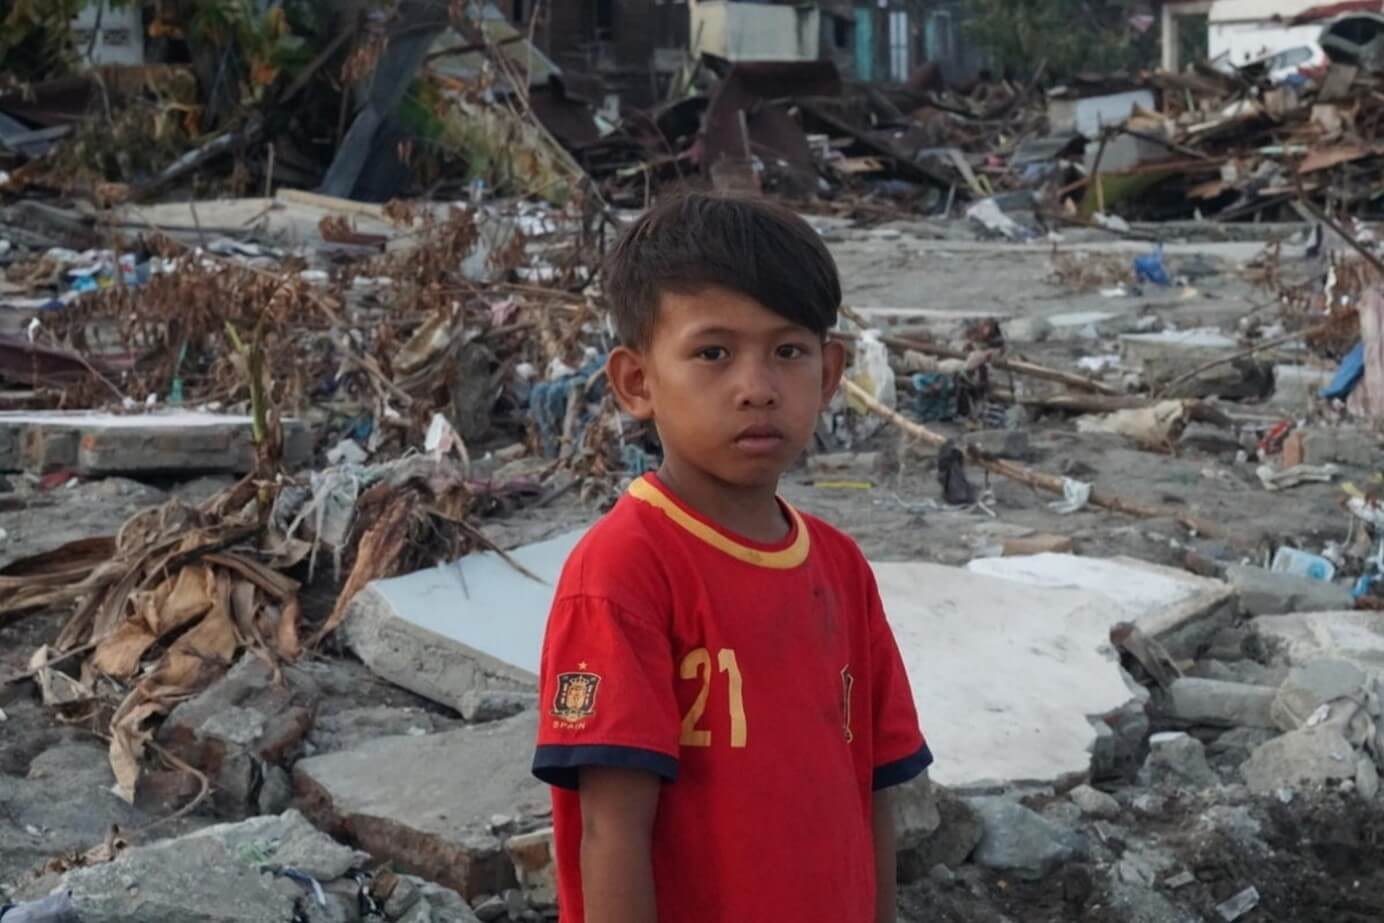 In Indonesia, a boy stands in front of the earthquake-tsunami devastation in his community.